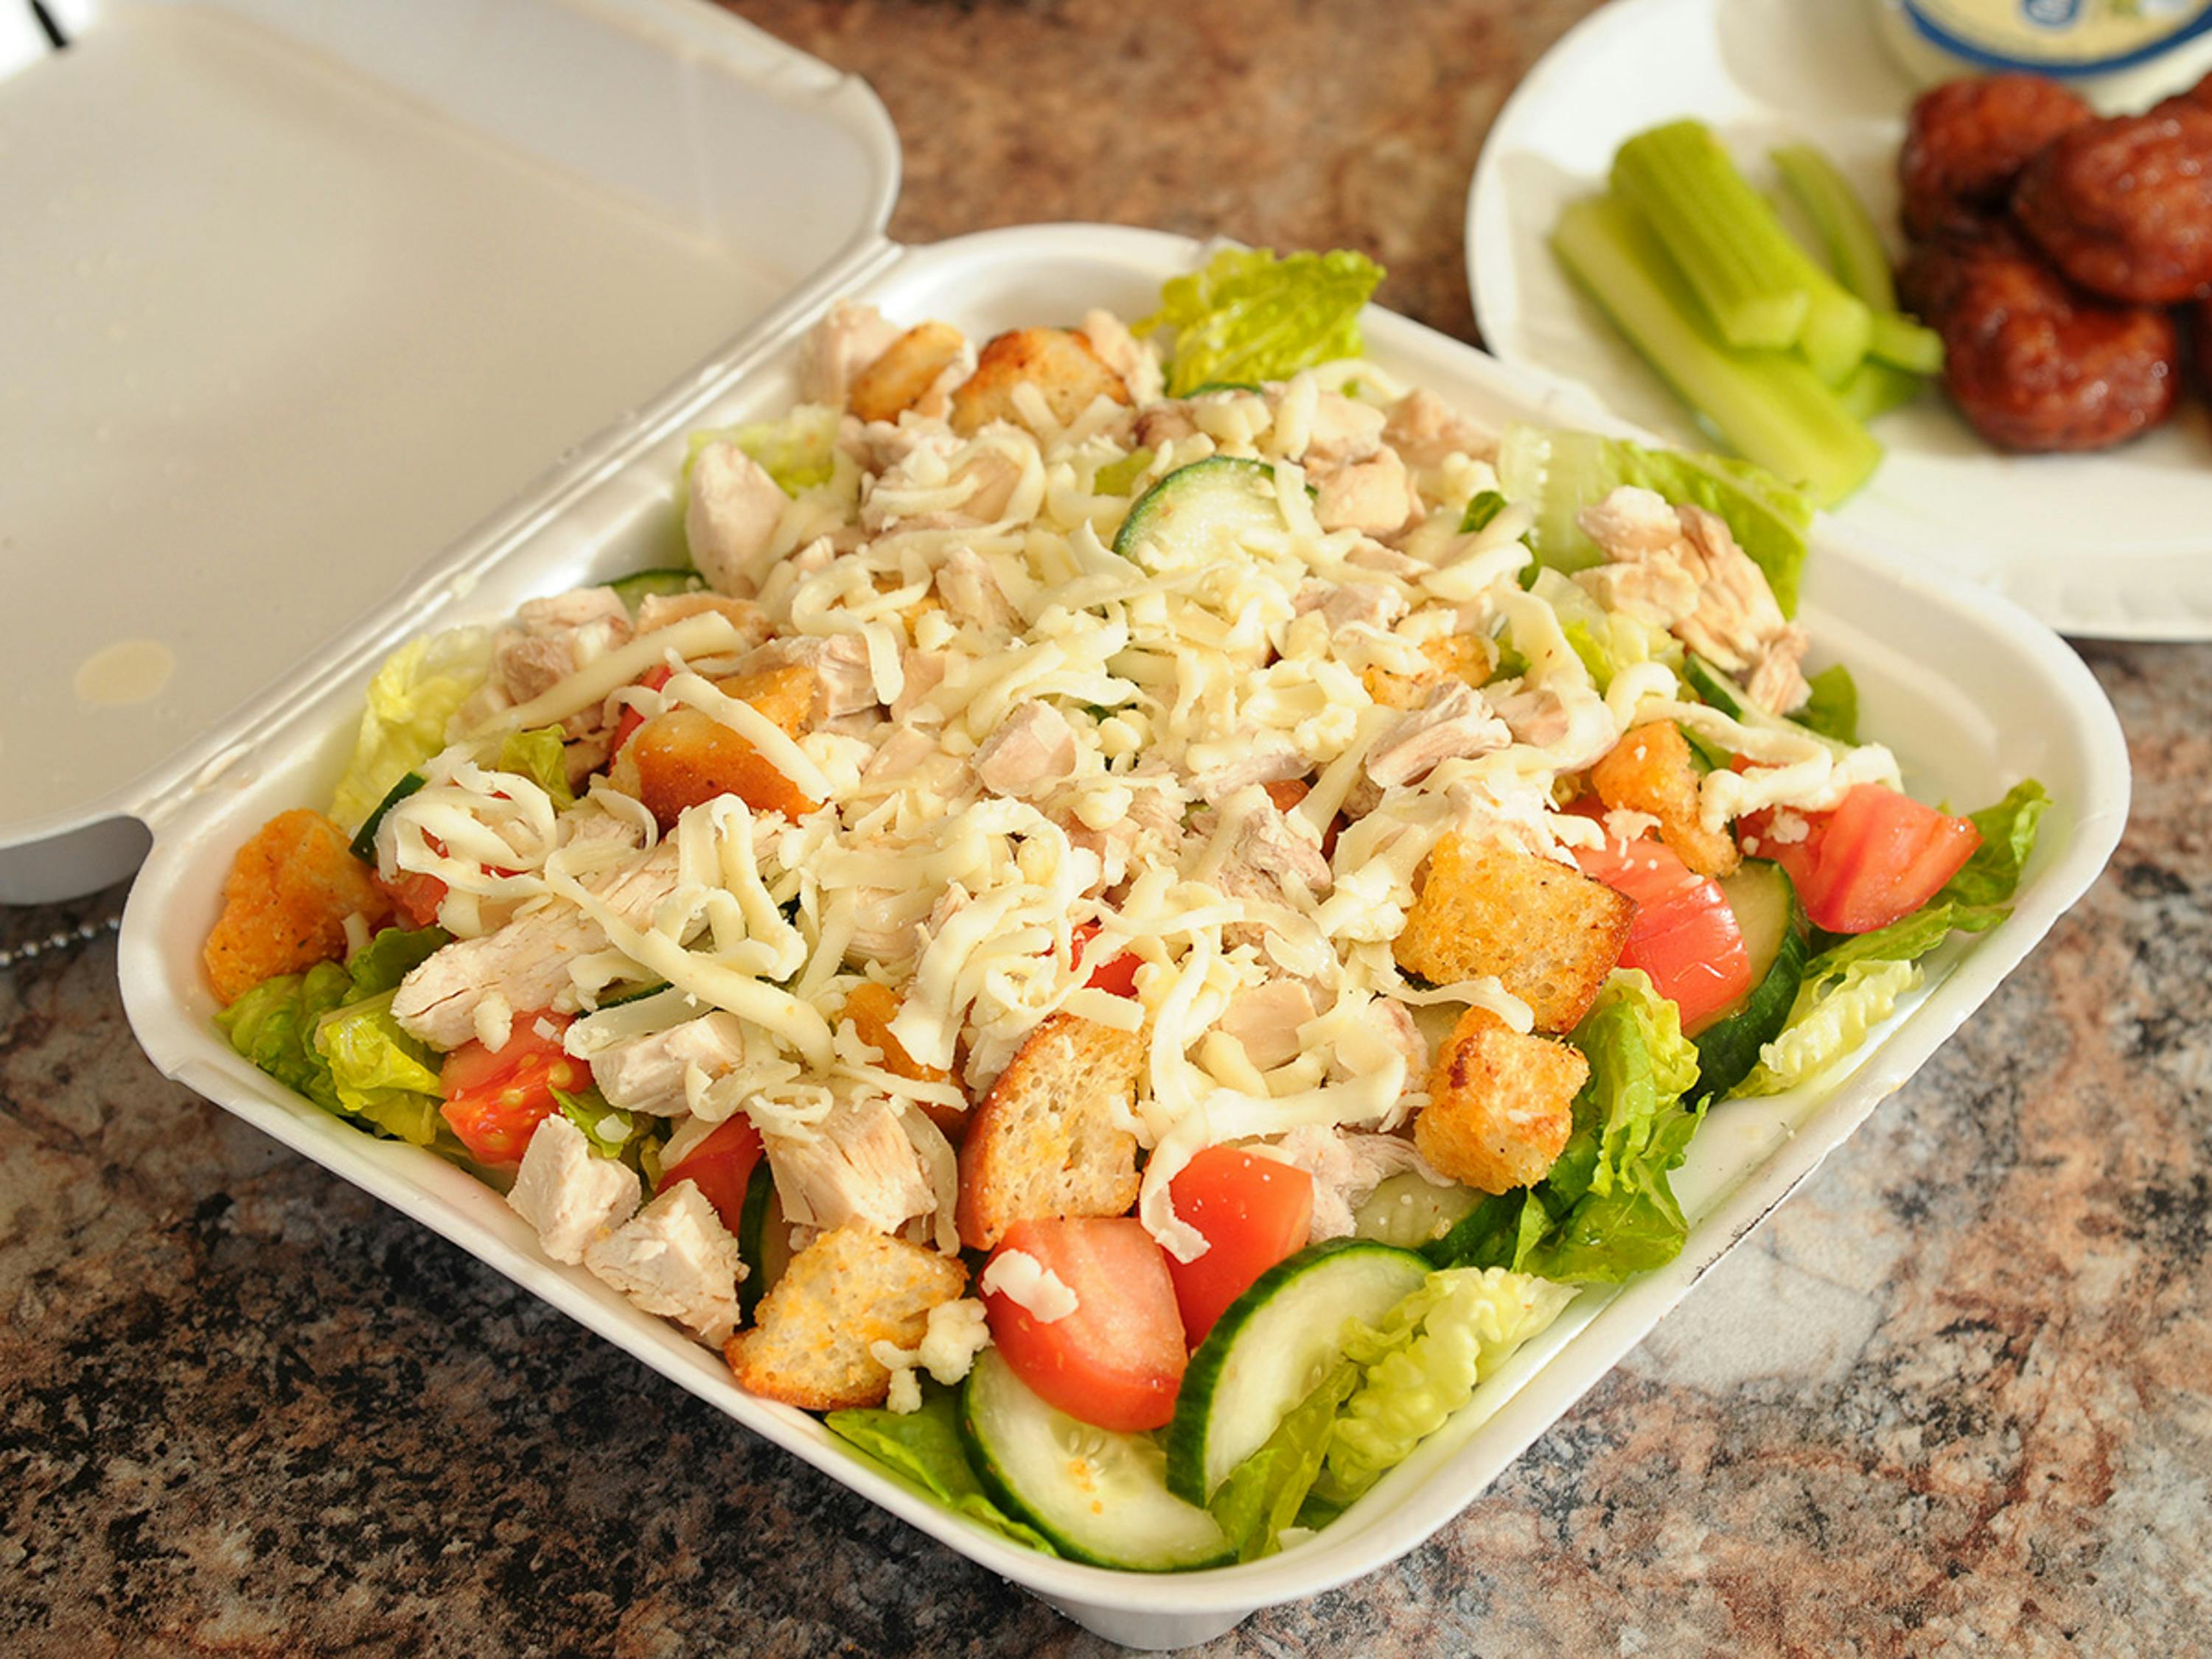 Grilled Chicken Salad from All Star Pizza in Rochester, NY